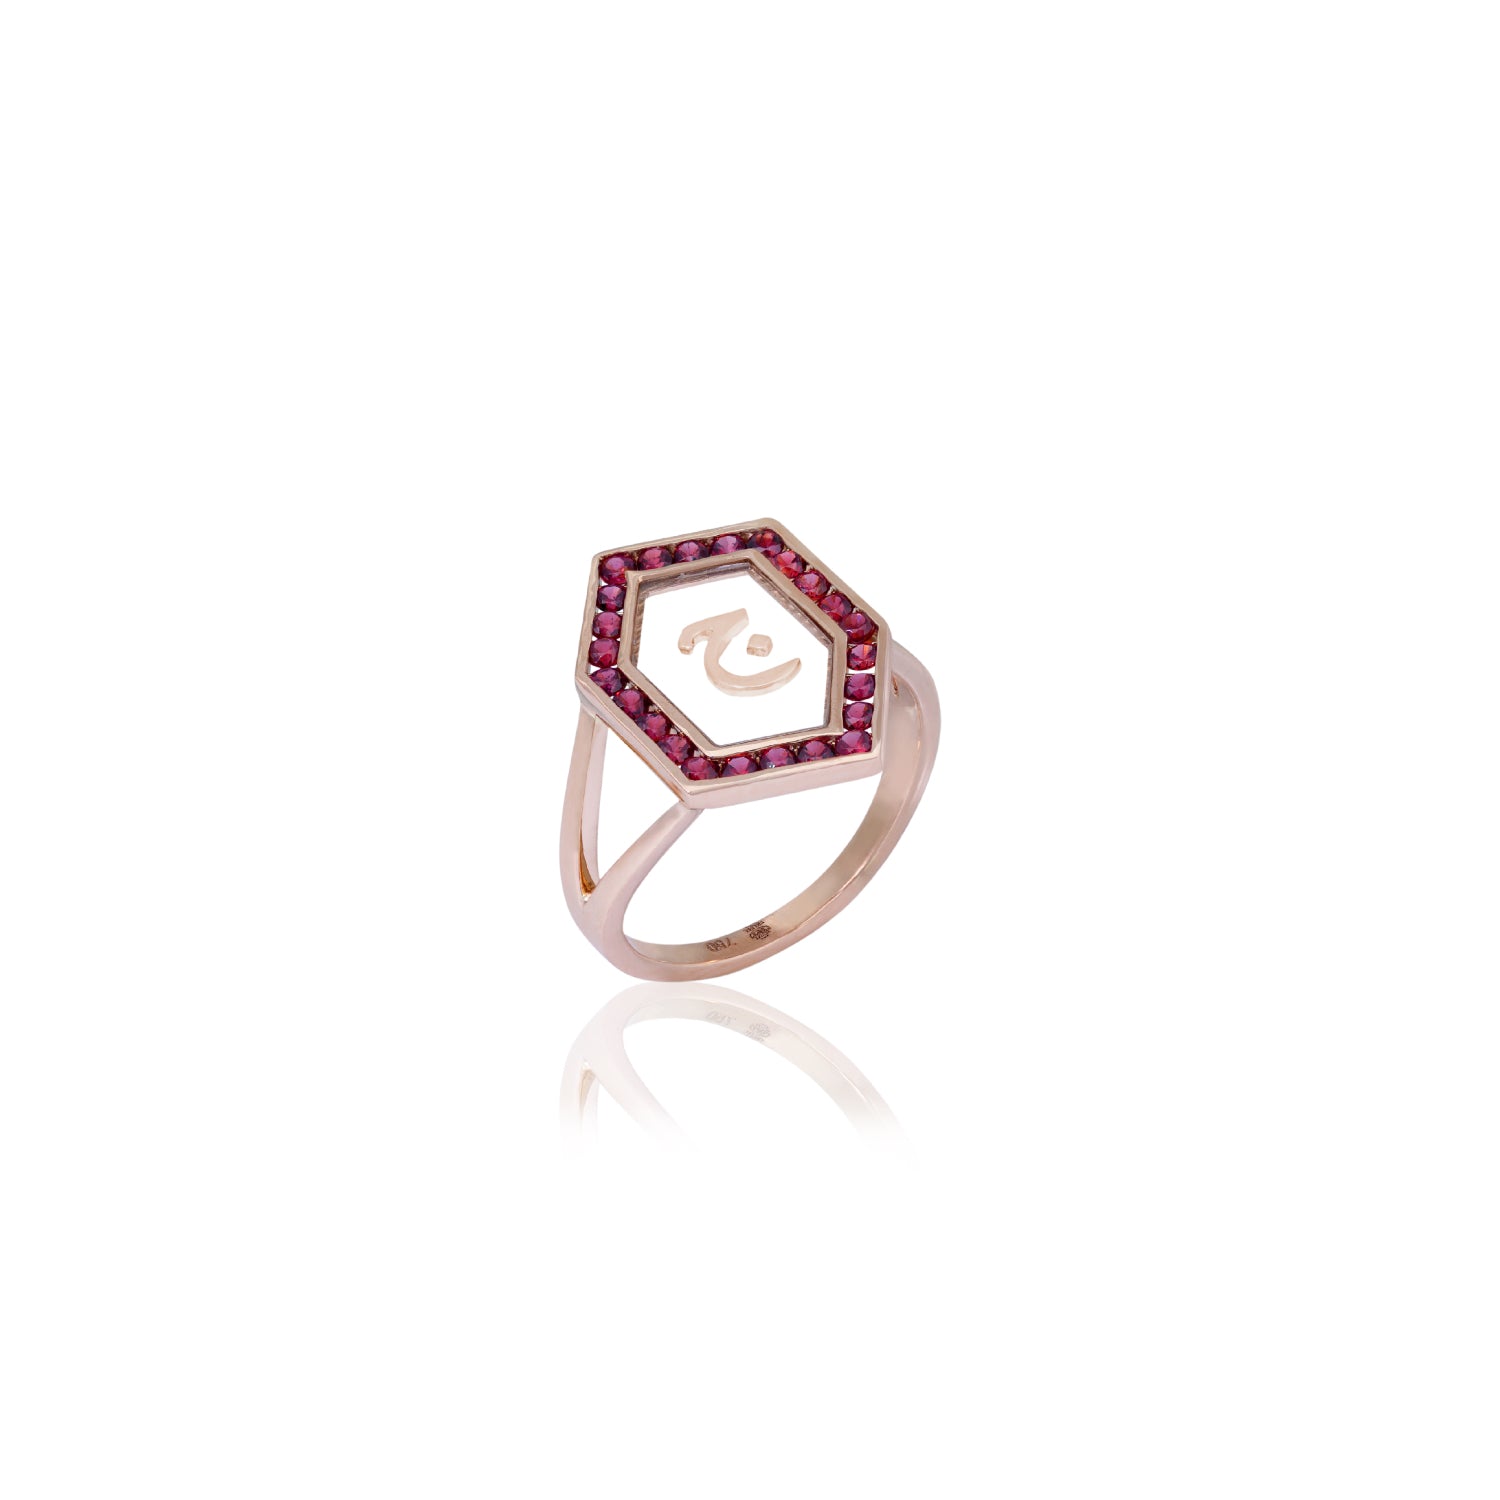 Qamoos 1.0 Letter ج Ruby Ring in Rose Gold